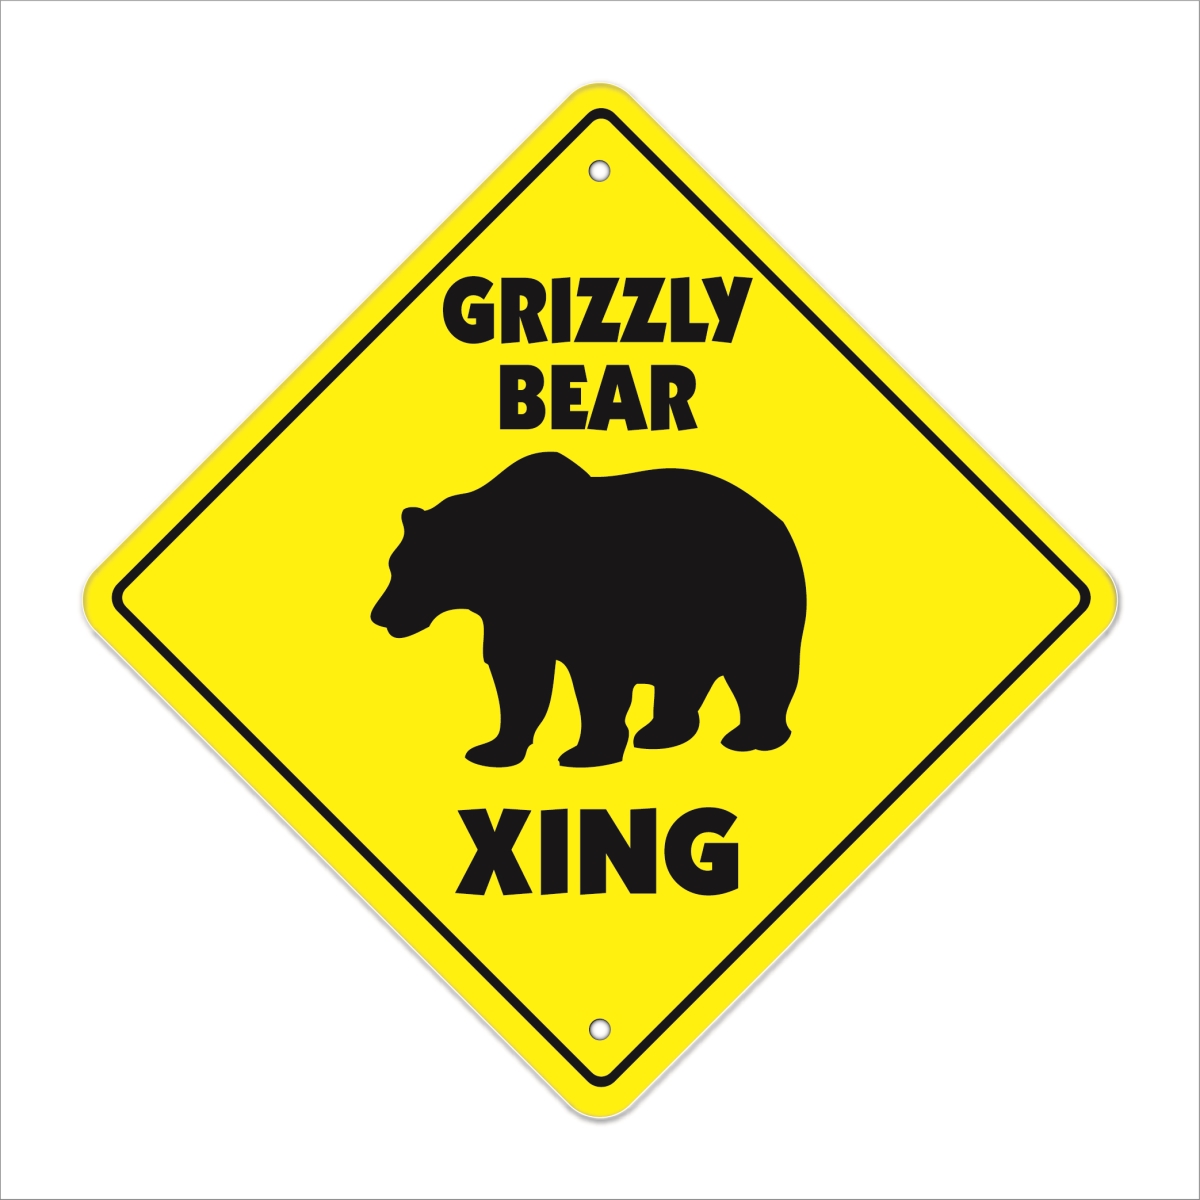 SignMission X-GRIZZLY BEAR 12 x 12 in. Grizzly Bear Crossing Zone Xing Sign